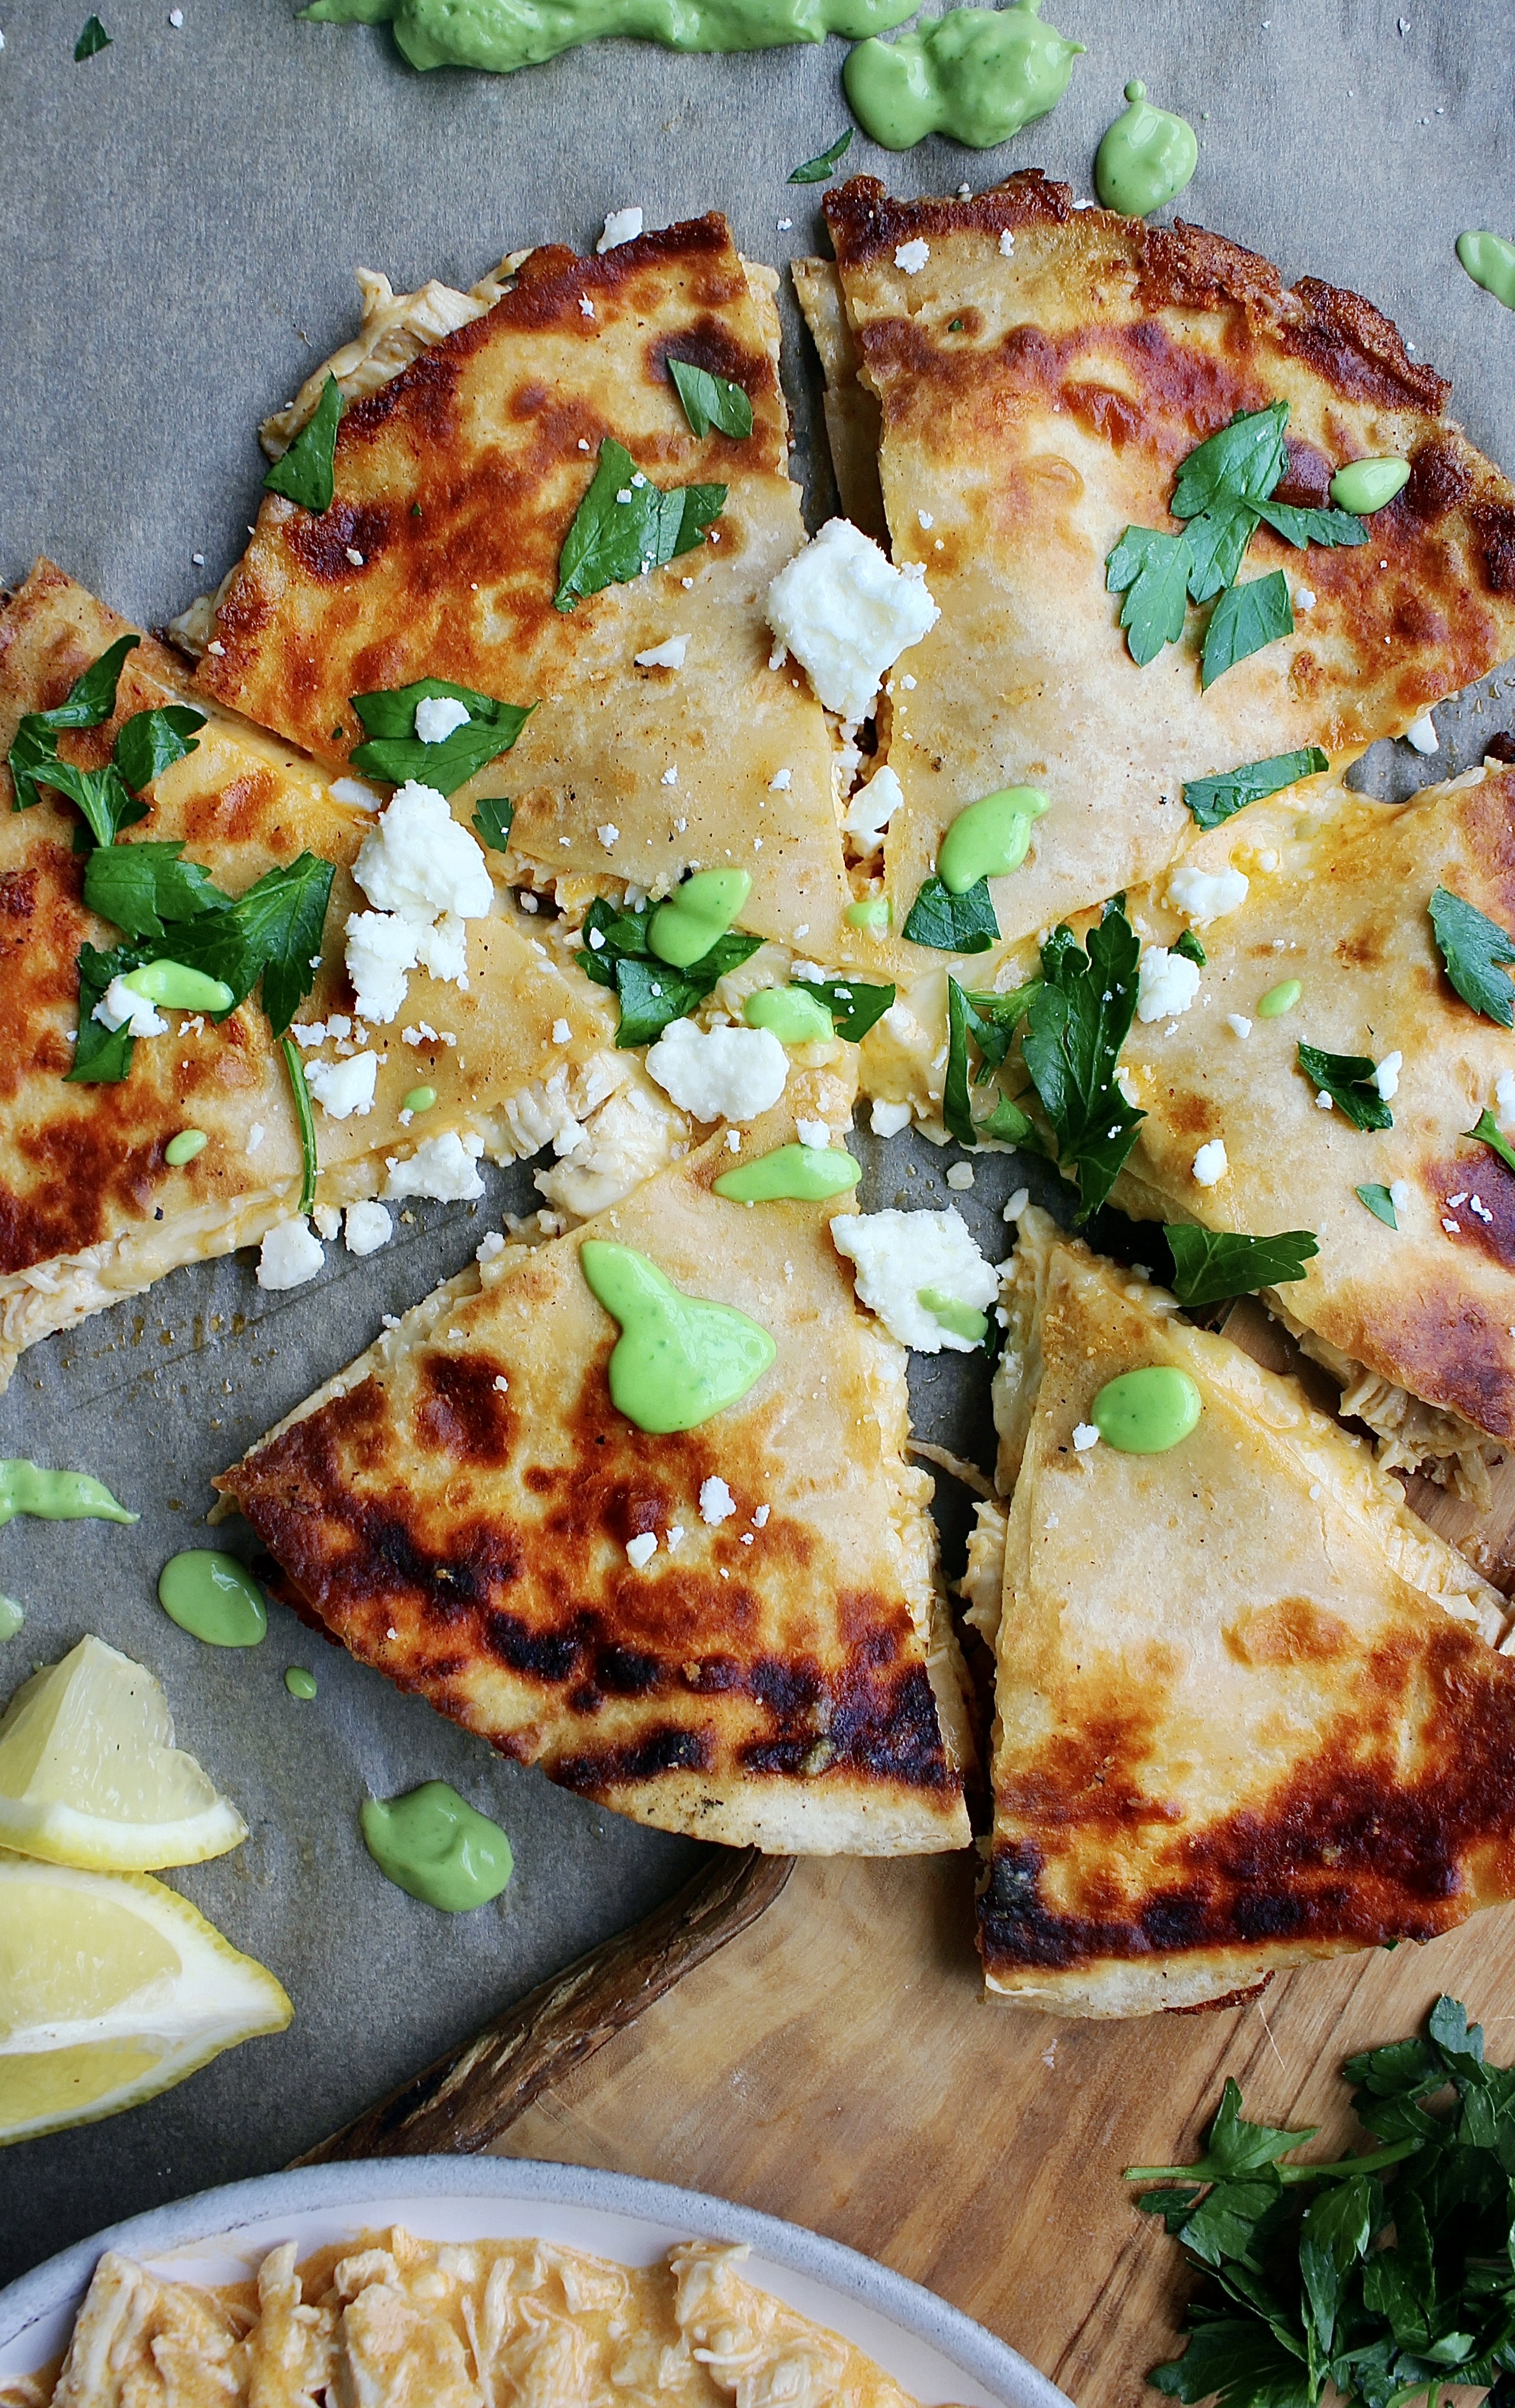 Saucy, creamy, and perfectly spiced, these Buffalo Chicken Quesadillas with Avocado Crema are packed with shredded buffalo chicken, all the cheese, and are dipped into a soothing avocado crema. There’s nothing better!!